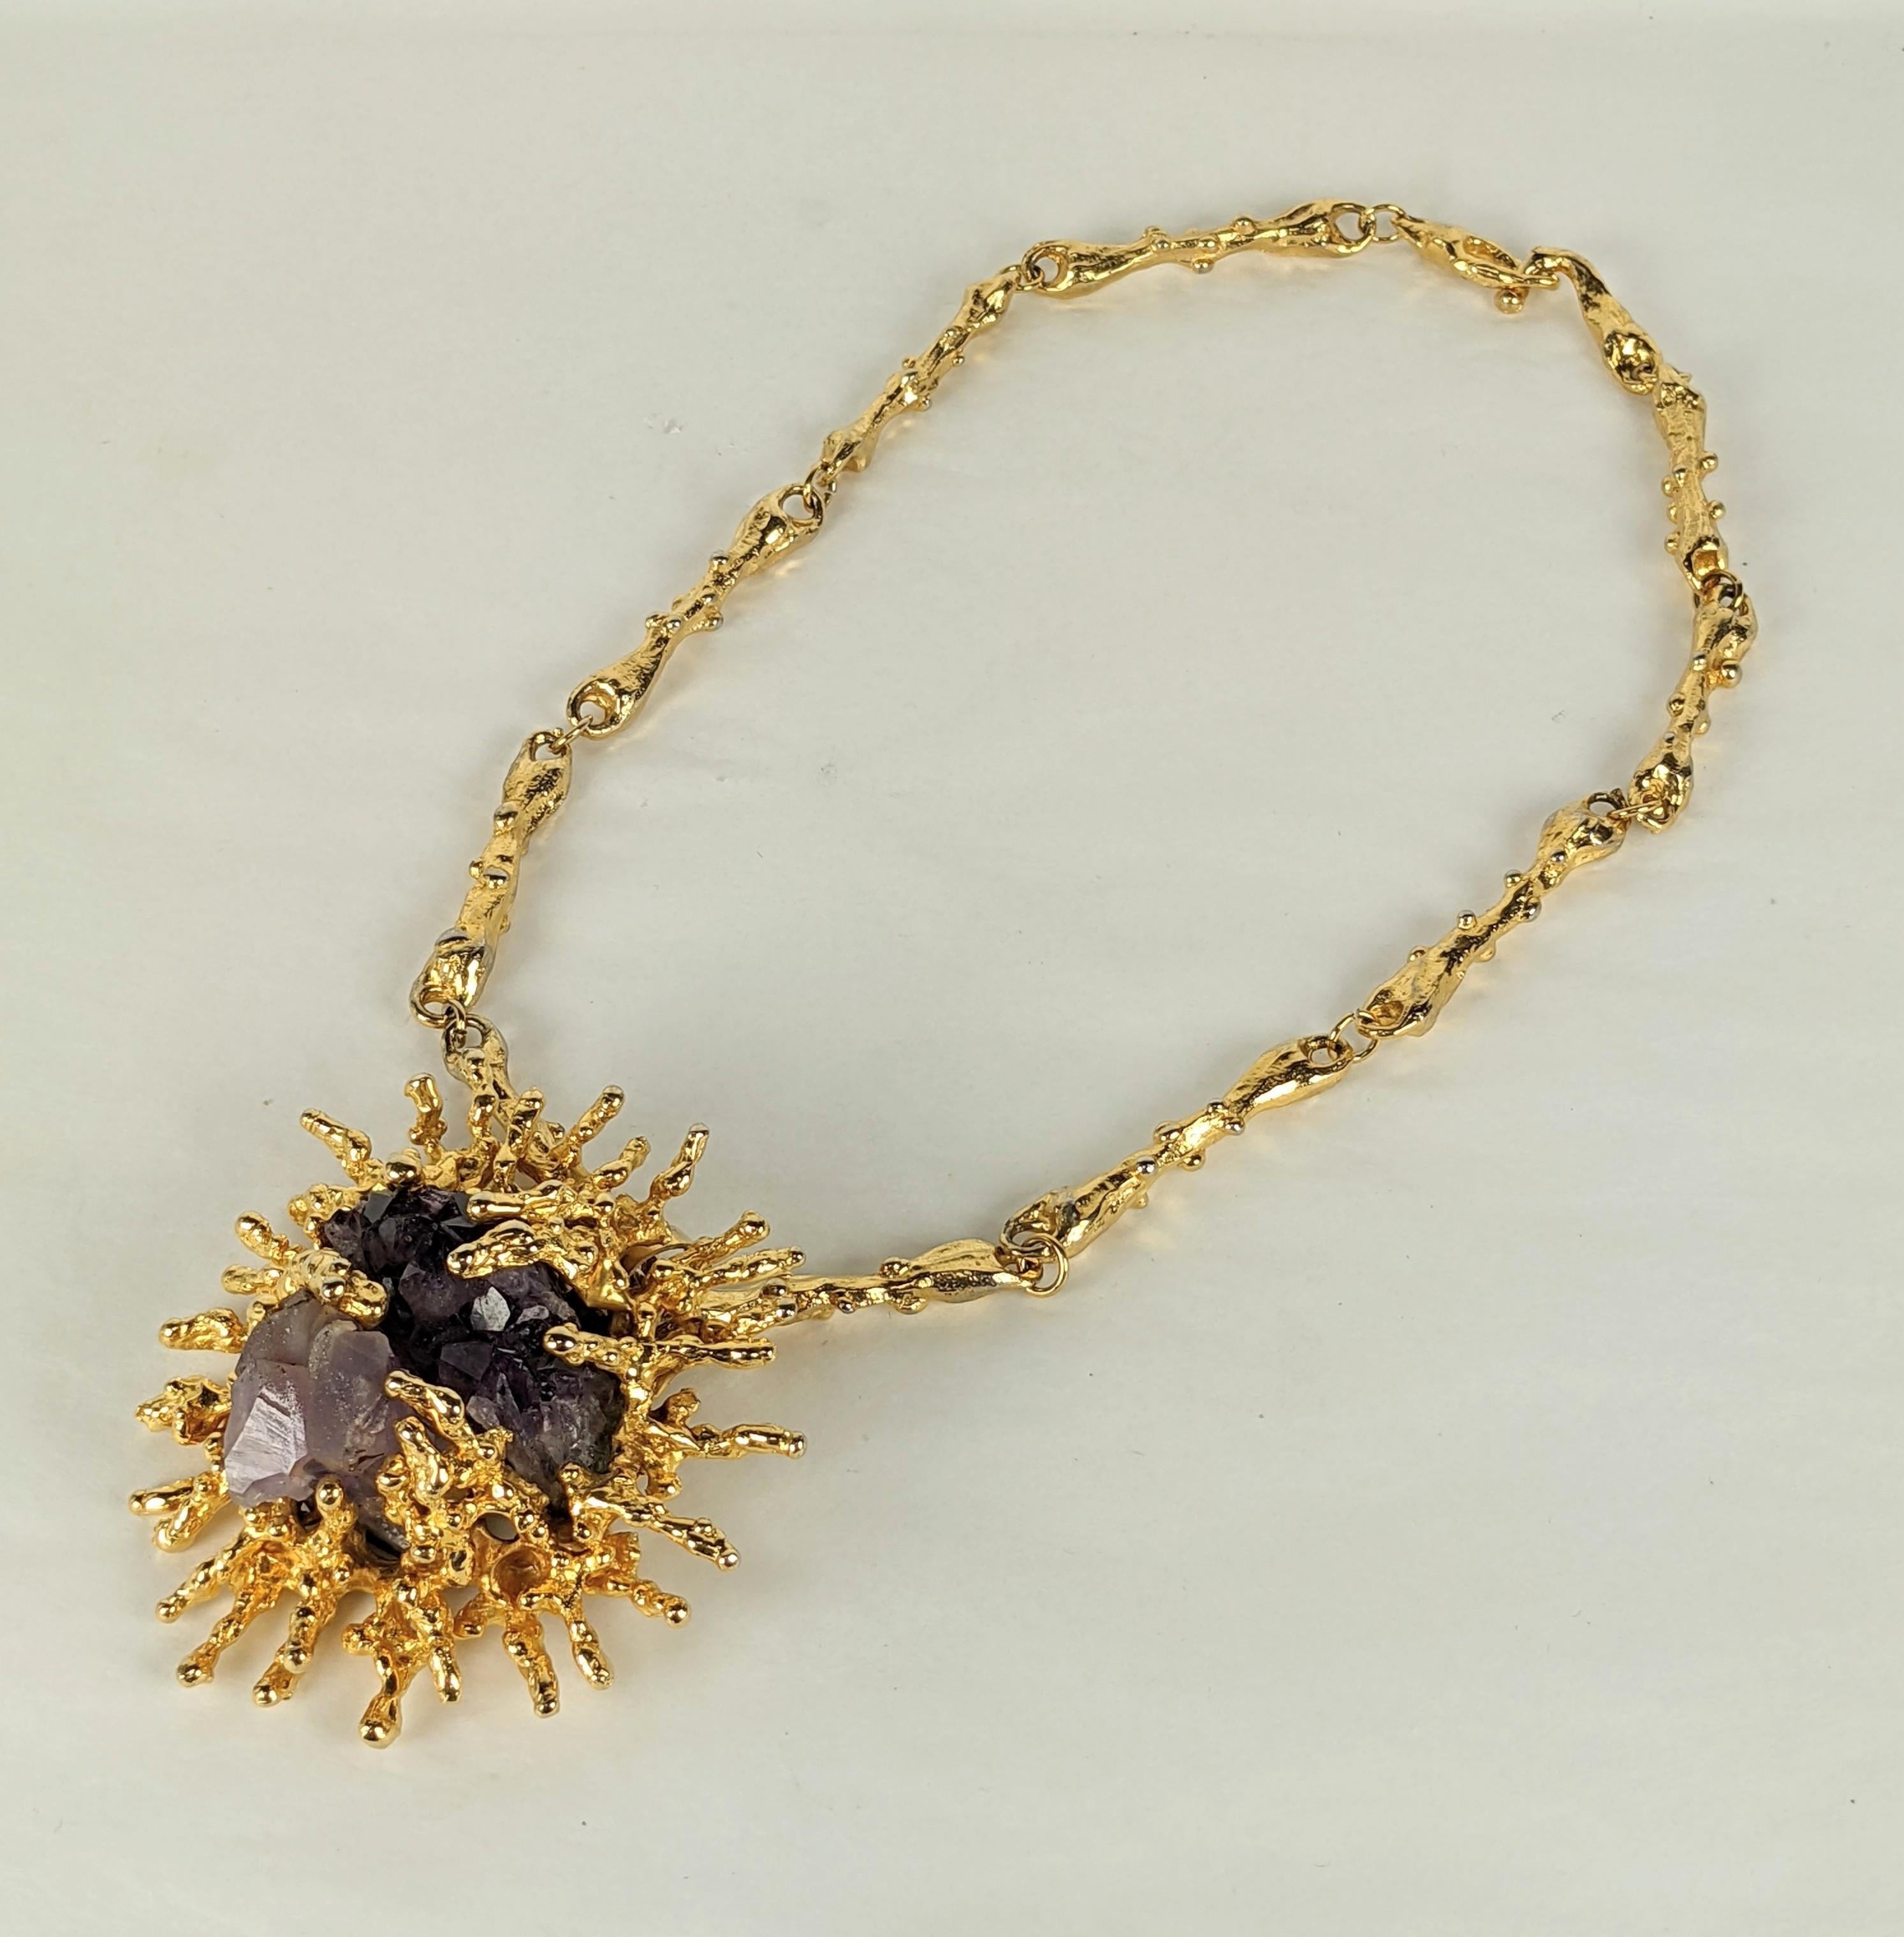  Brutalist sculpted pendant necklace by Panetta. Natural Amythest crystals are surrounded by sculpted abstract gold metal branch coral shaped formations. Massive scale with original abstract coral branch link chain. Excellent condition. Unsigned.